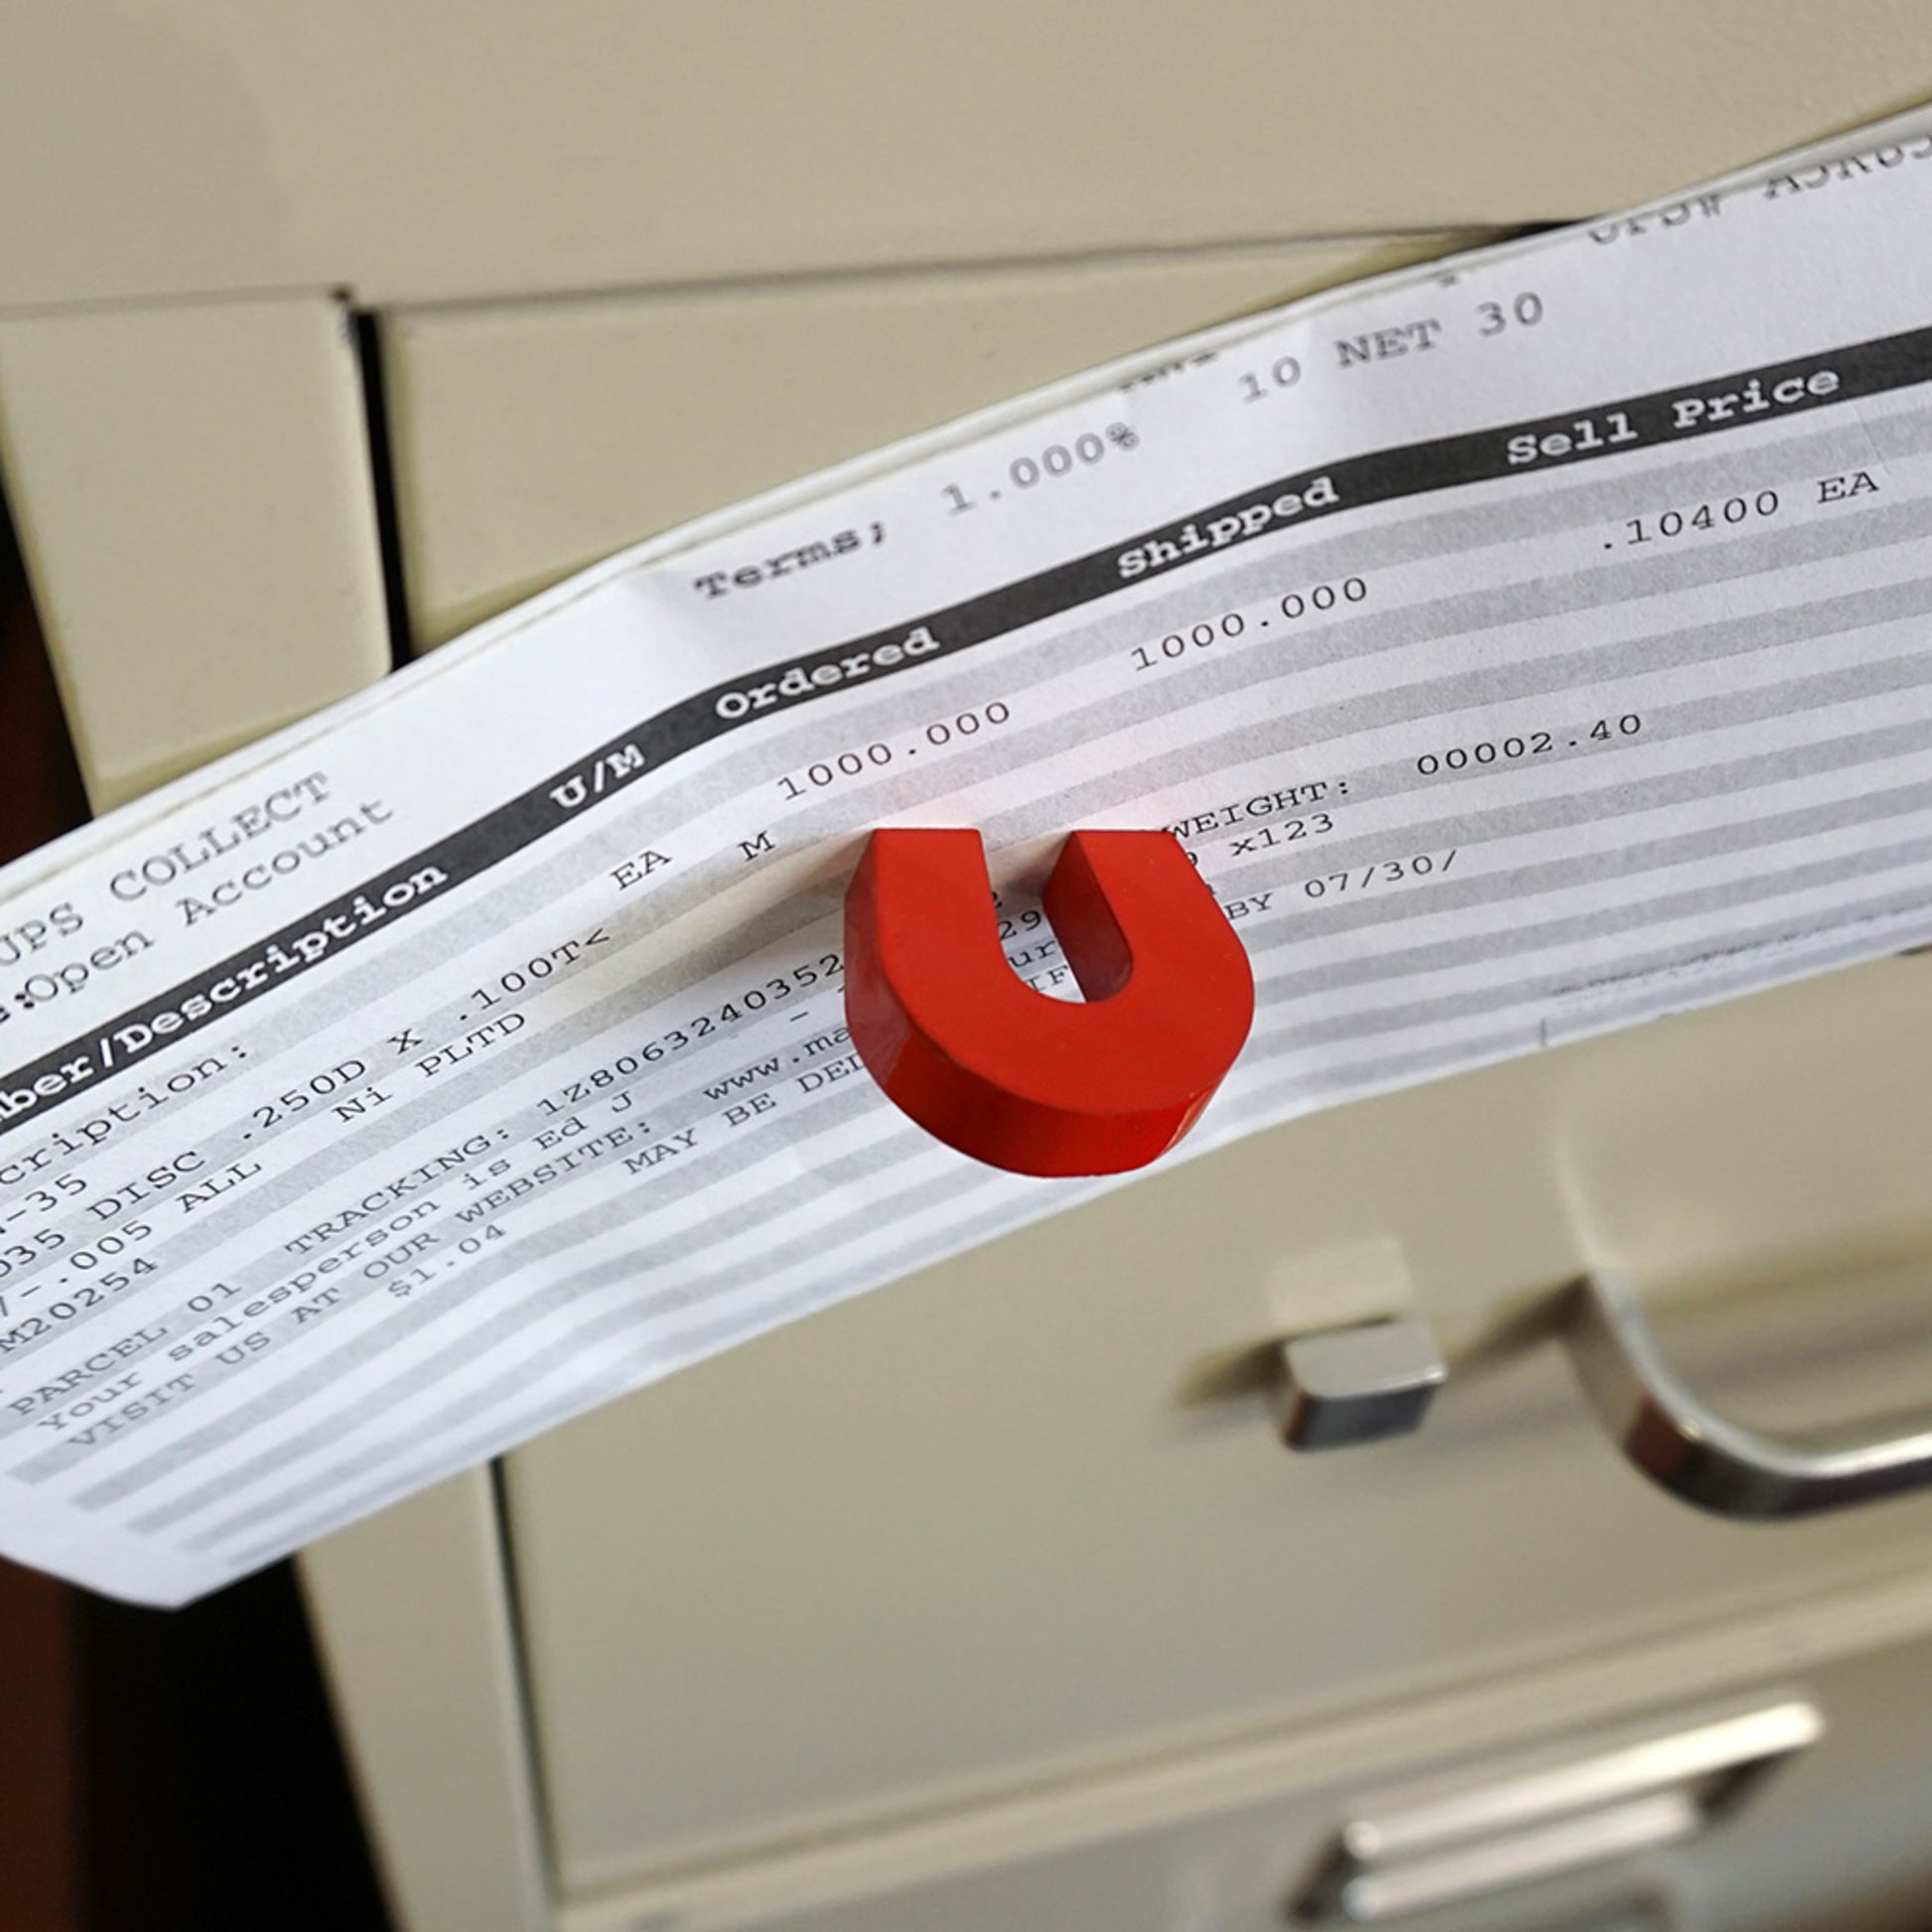 Load image into Gallery viewer, 07279 Alnico Horseshoe Magnet with Keeper - Holding Paperwork On a File Cabinet